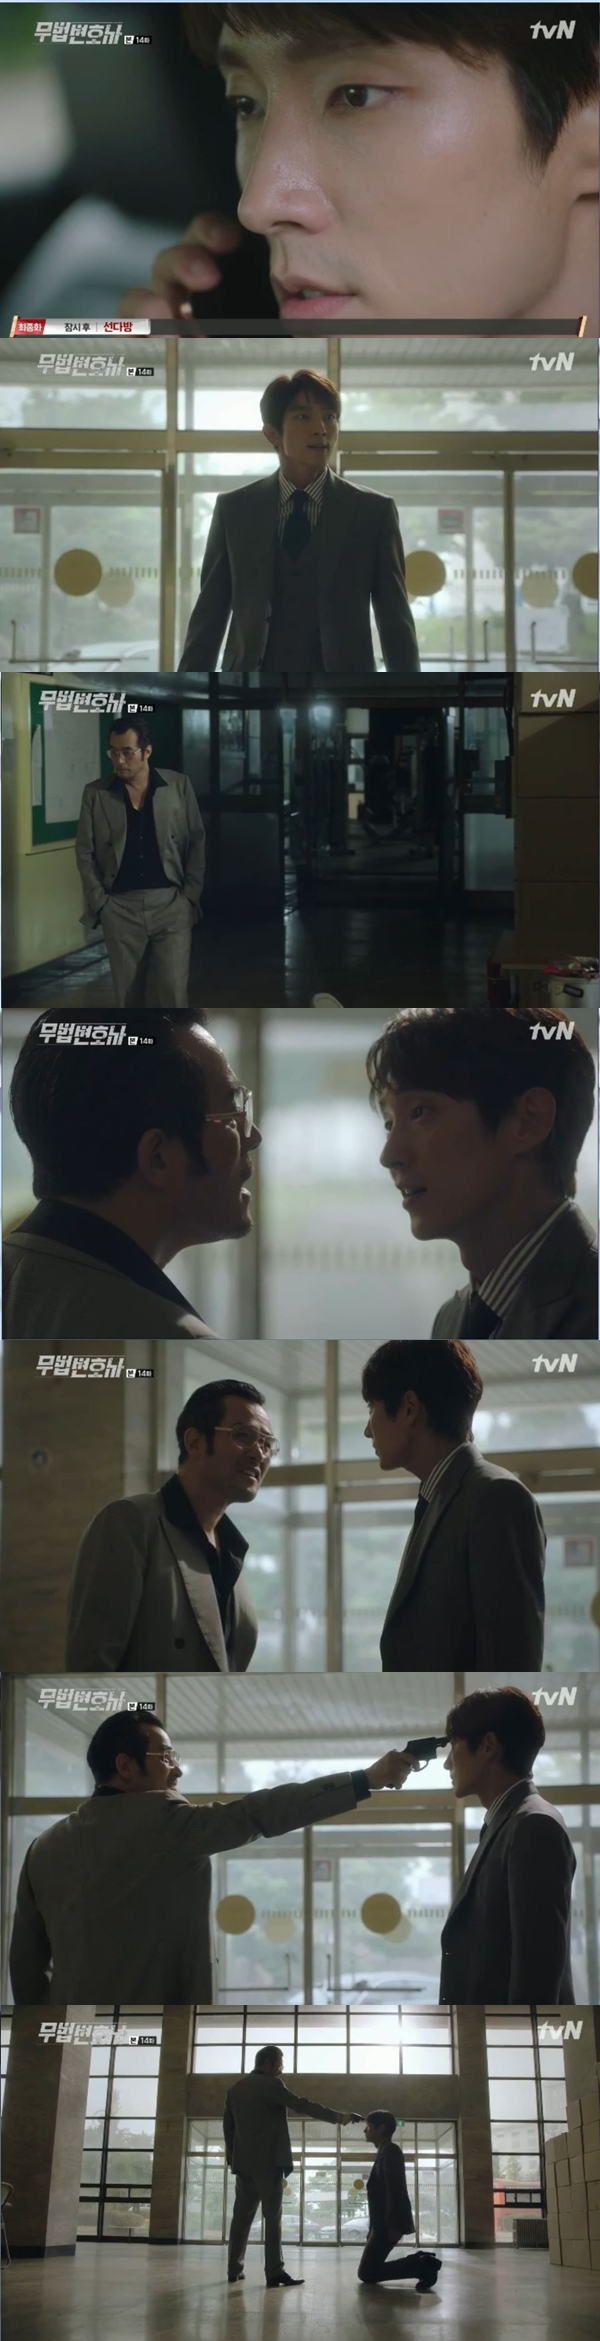 Bong Sang-pil (Lee Joon-gi) is in danger.On TVN Lawless Lawyer, which was broadcast at 9:10 pm on the 24th, Bong Sang-pil, who visited An-oh Joo, who made a kidnap of Seo Ye-ji during the trial, appeared.Nam Soon-ja (Um Hye-ran) was investigated by the prosecution and shouted, I do not know what I am with Chief Prosecutor.Chun Seung-beom (Park Ho-san) said, It is too certain to be conspiratorial. He showed a video of Nam Soon-ja giving someone a murder order.I sold Arlington Road, said Chun Seung-beom, and what is his name? And Nam Soon-ja was confused.Nam Soon-ja, who was in turmoil, asked Chun Seung-beom to be able to call him, and called Cha Moon-sook (Lee Hye-young). Nam Soon-ja told her, I am under prosecution investigation now.The thug put you and me on Arlington Road, and once you know the name of the thug, you tell me.However, Cha Moon-sook said, Did you see me remember the name of such a person? Tell me through a lawyer of Goindu (Jeon Jin-gi) once, he said coolly and hung up.Bong visited Chun Seung-beom, the prosecutor in charge of the case of Nam Soon-ja. He asked, I heard there was video evidence. Did you get it from the chief prosecutor?Have you thought about where you got it? Ha Jae-yi asked, beside him.Why do you think Cha Moon-sook handed over important evidence to the prosecutor to remove Nam Soon-ja?After completing the conversation with Chun Seung-beom, Bong Sang-pil met Nam Soon-ja, who asked, Why did you come out after receiving my interview? and said, I came to deal with you.Bong Sang-pil said, I know that you have managed the account of Cha Moon-sook. Nam Soon-ja denied it, raising his voice saying, It has nothing to do with me.Bong Sang-pil said, Is there anyone who knows better than me? Is there a judge behind all this?However, Nam Soon-ja did not shake, and Bong Sang-pil said, Think about what happened to the heavenly An-ju now.Nam Soon-ja asked her daughter Kang Yeon-hee (Cha Jung-won) to persuade Cha Moon-sook with a donation book, but Cha Moon-sook told Kang Yeon-hee, To be a strong judge, you have to know how to cut out life and death.Tell your mother to pay for it. After hearing Cha Mun-suks words, Nam Soon-ja recalled what Bong Sang-pil said.Bong Sang-pil suggested that An-oh Joo also take his hand, saying that he was in a state of his own condition due to Cha Moon-sooks scheme. Nam Soon-ja made Kang Yeon-hee to visit Bong Sang-pil instead and delivered the donation book of Cha Byung-ho Foundation.Ha Jae-yi said, Nam Soon-ja informed him that there is evidence of corruption in Cha Moon-suk. Bong Sang-pil signed with Nam Soon-ja and said, I will not let you pay for what you did not build.I did not do it all after being instructed by Cha Moon-suk. Nam Soon-ja was excited and raised his voice saying, Yes, what did I know? Bong succeeded in changing the judge, which was planted by Cha Moon-sook in the first trial. Chun Seung-beom also agreed to replace the judge after seeing the real estate data of the judge submitted by Bong Sang-pil.Bong Sang-pil, who had successfully completed the trial and left the court, found Ha Jae-yi, but Ha Jae-yi did not, and the phone came to his phone, but the main character of the phone was An-oh-ju, not Ha Jae-yi.Anoju took Ha Jae-yi hostage and Bong Sang-pil blackmail – Cinémix Par Chloé, who said: If you want to save Ha Jae-yi, come where I am.Bong Sang-pil went to the place where he was, angry that you will die if you touch him. Bong Sang-pil called An-oh, and An-oh walked out alone.I do as you want to keep it, he told Bong Sang-pil, and you are a broken bowl.Then, An-ju pointed the gun at Bong Sang-pil and said, You are over.